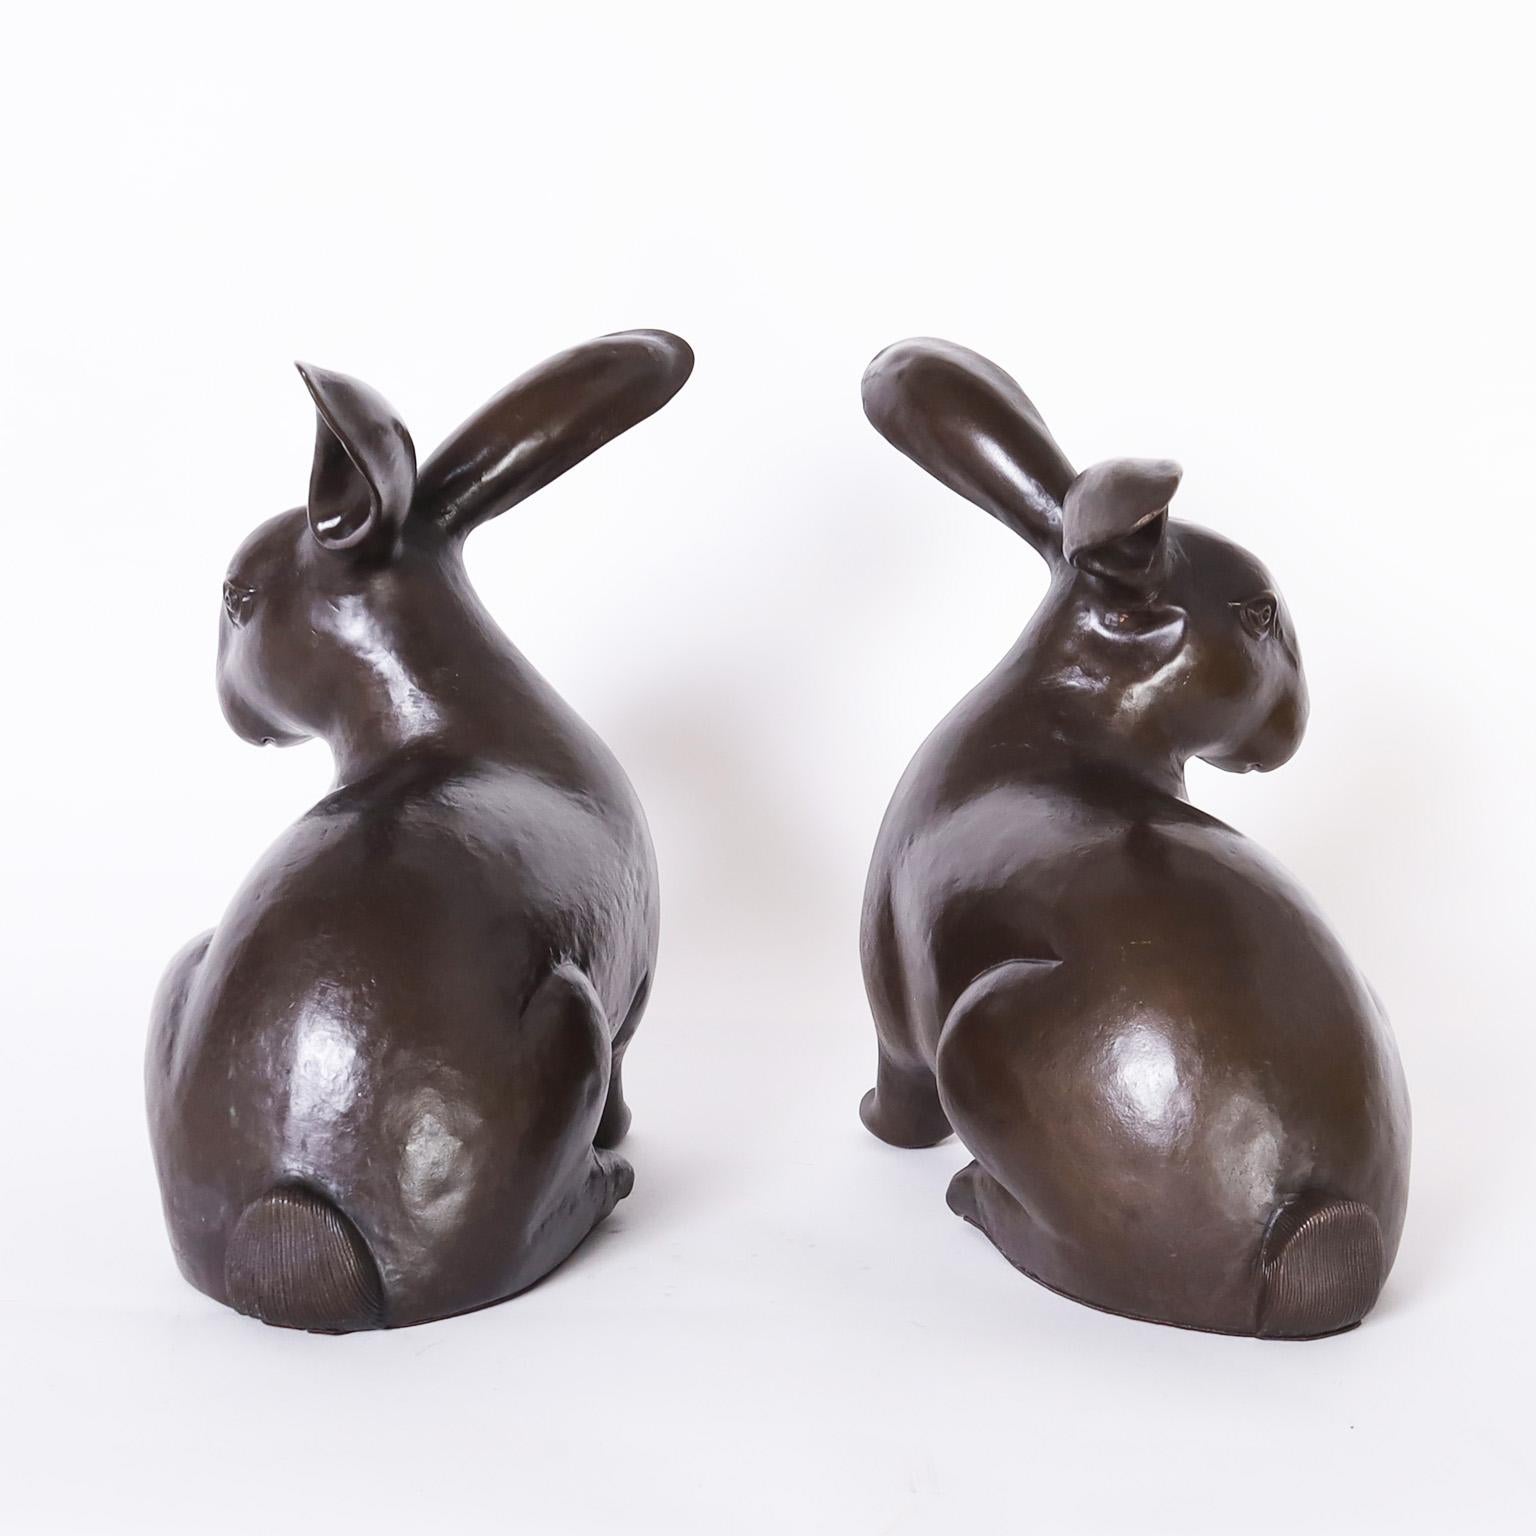 American Pair of Patinated Copper Rabbit Sculptures